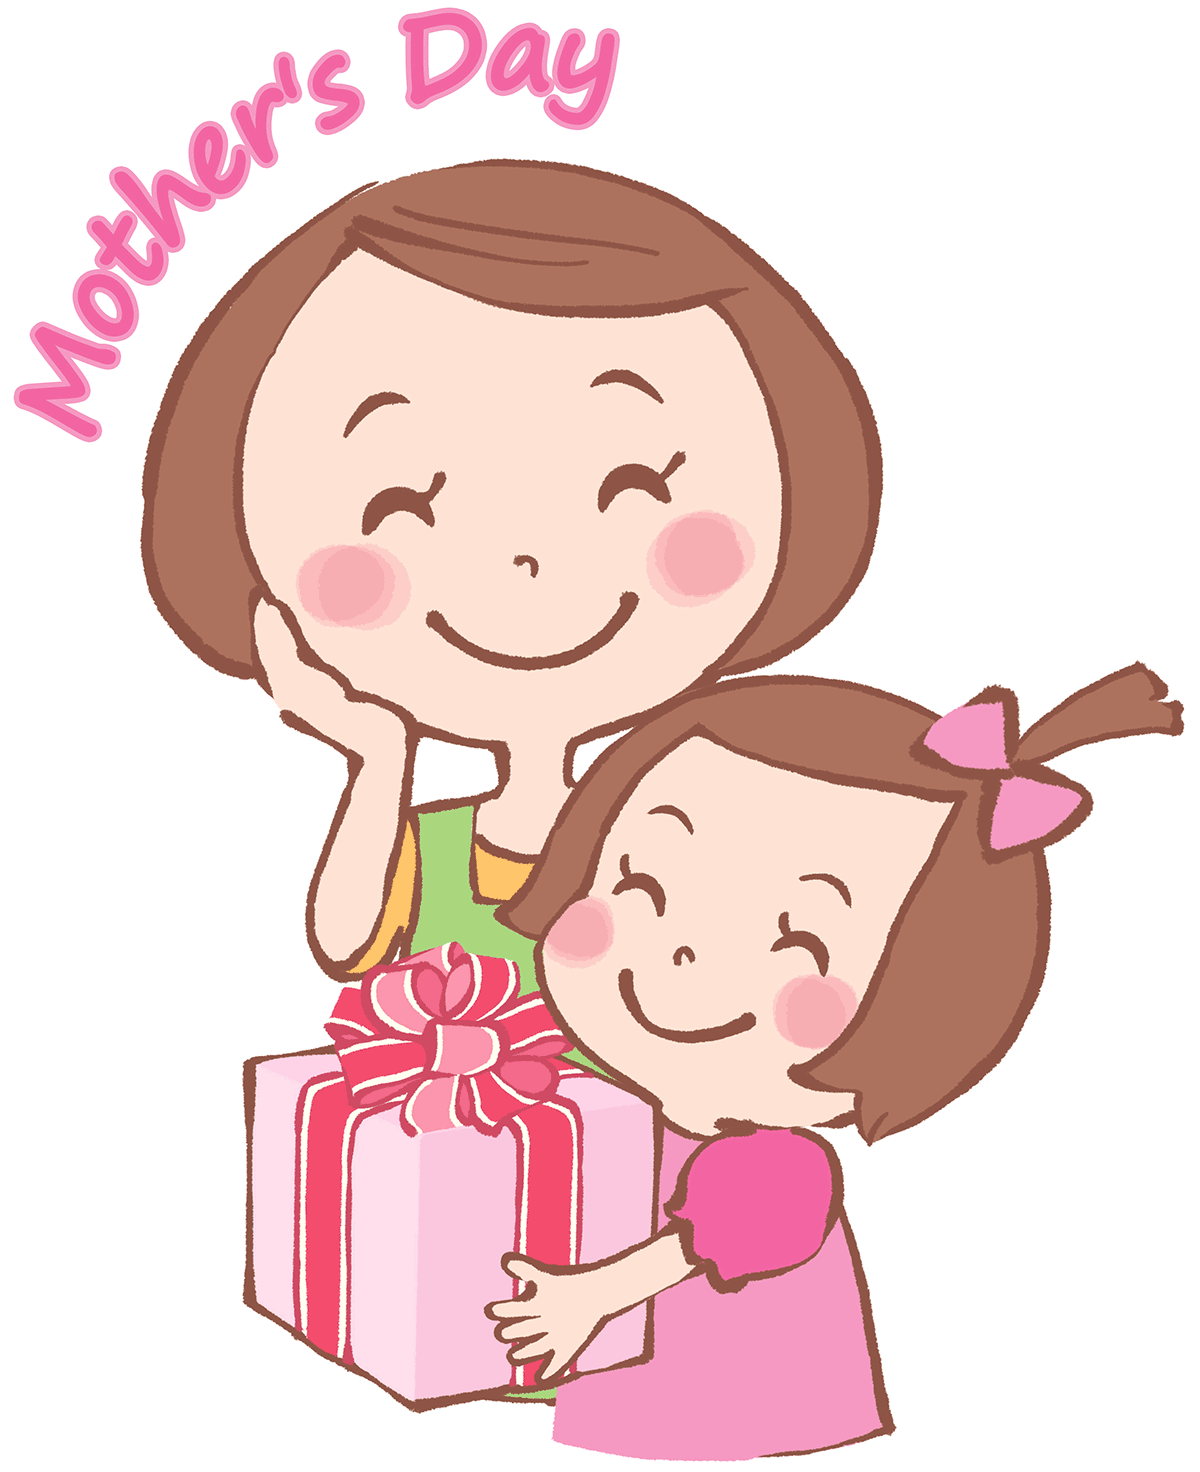 Gifts clipart mother's day. Daughter giving her mother